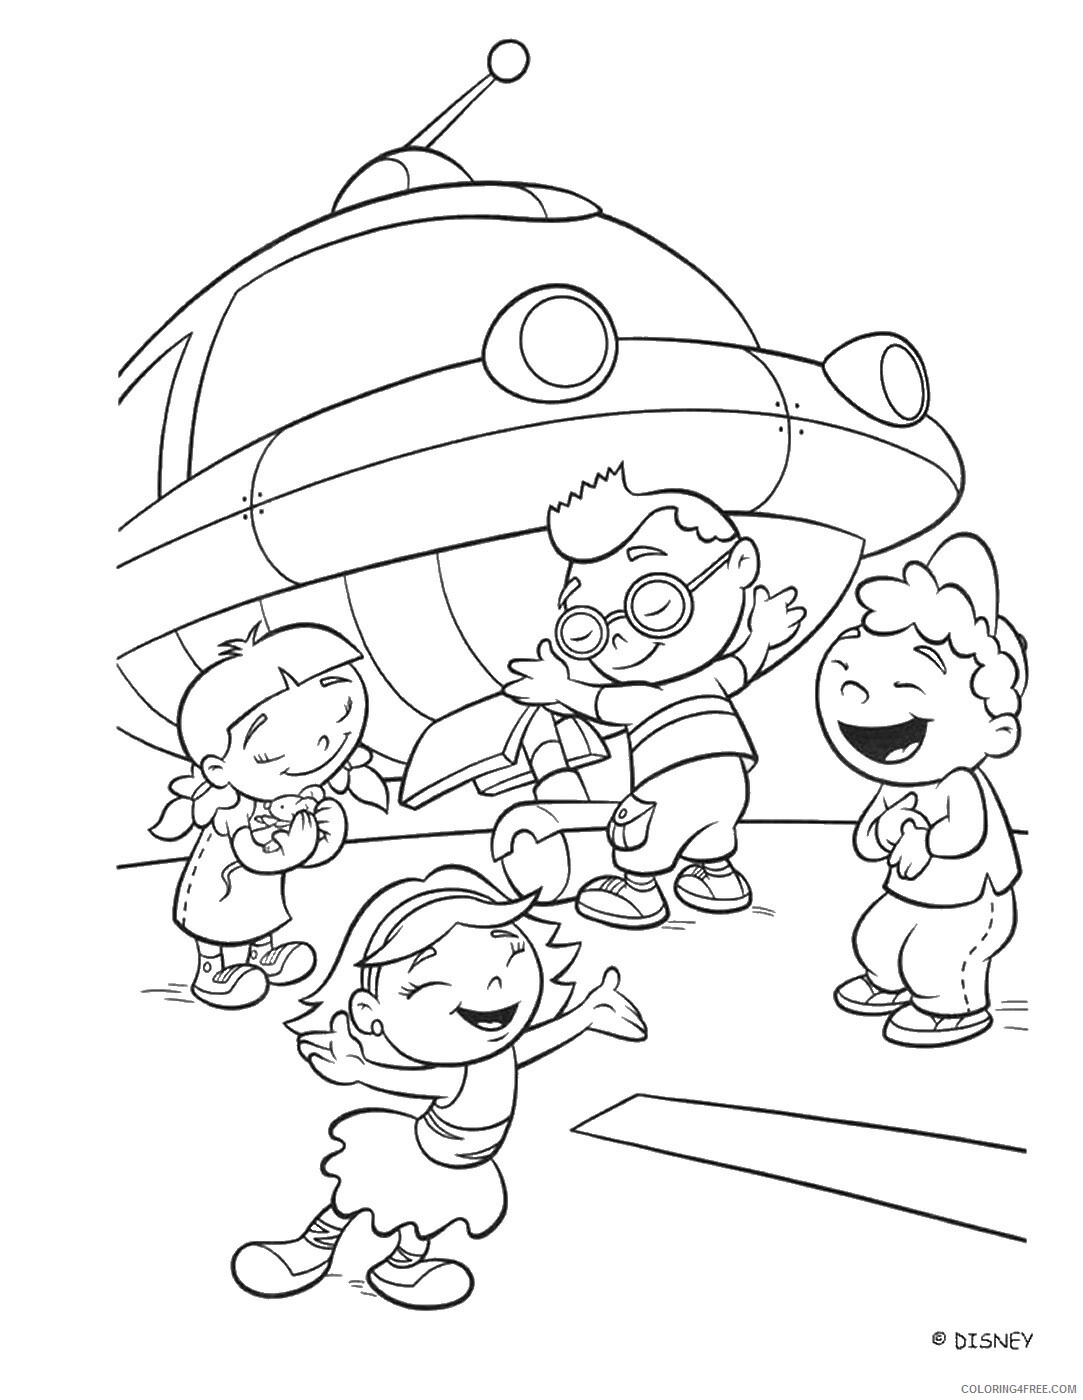 Little Einsteins Coloring Pages TV Film little_einsteins_07 Printable 2020 04471 Coloring4free